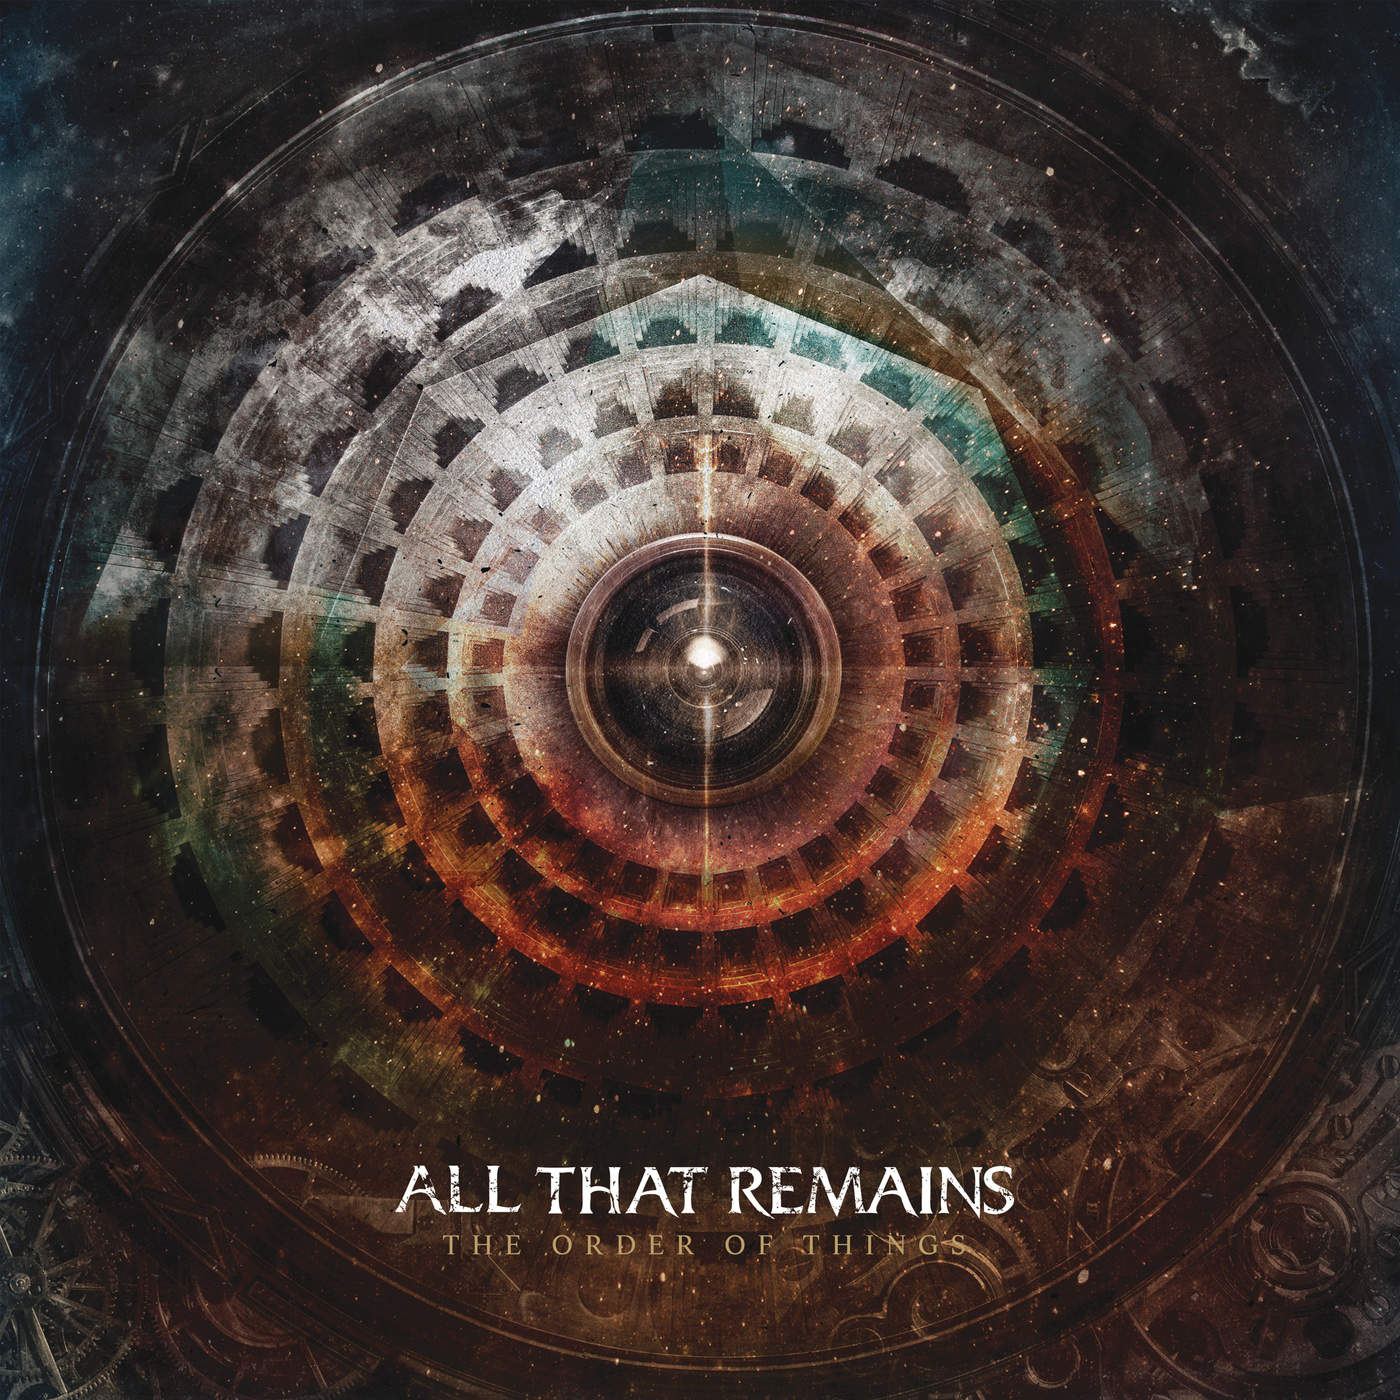 CD All that remains - The order of things